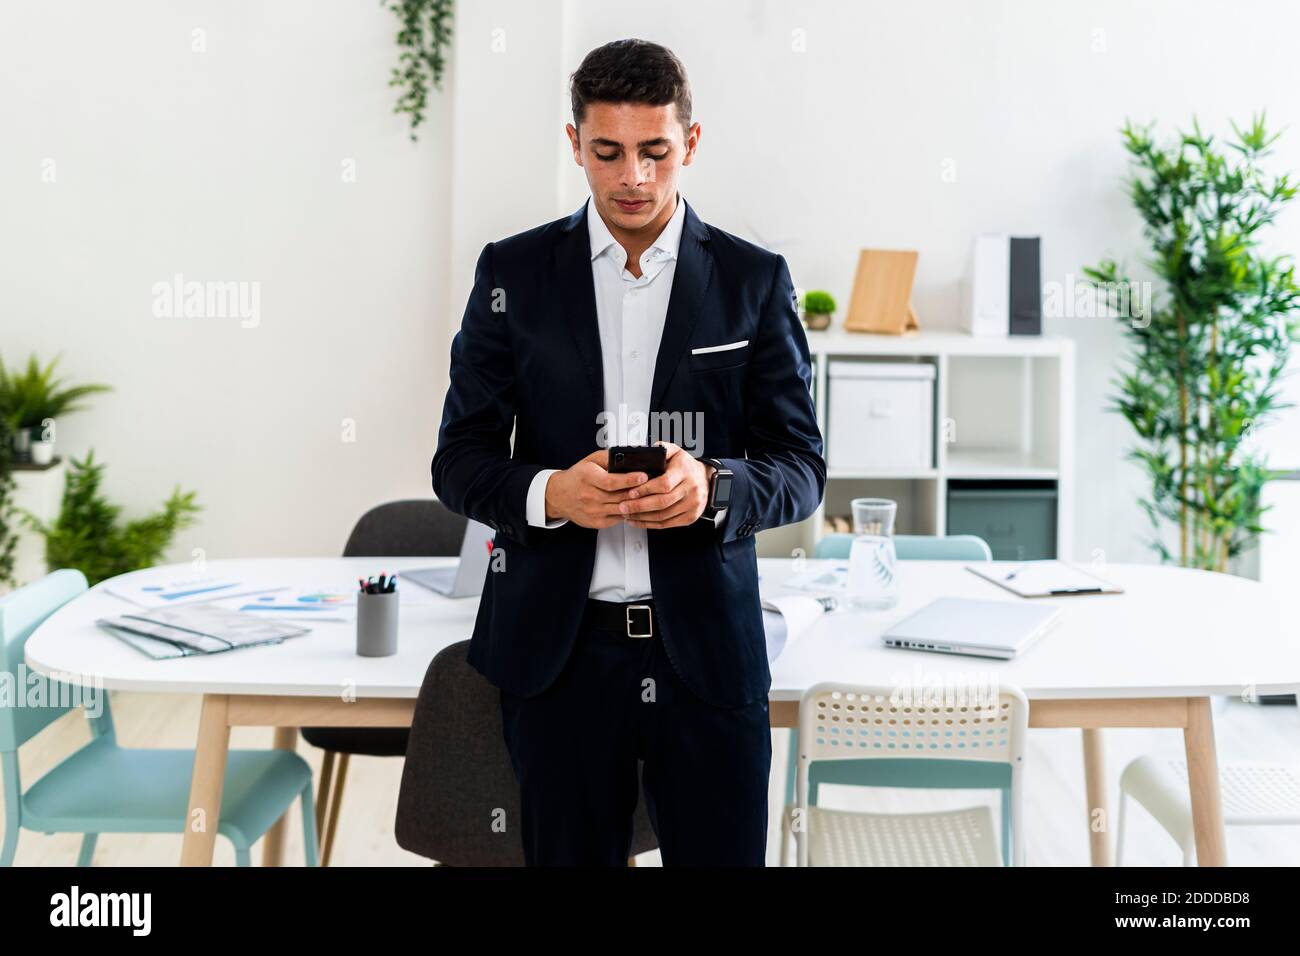 Handsome young professional text messaging while standing against desk at creative workplace Stock Photo